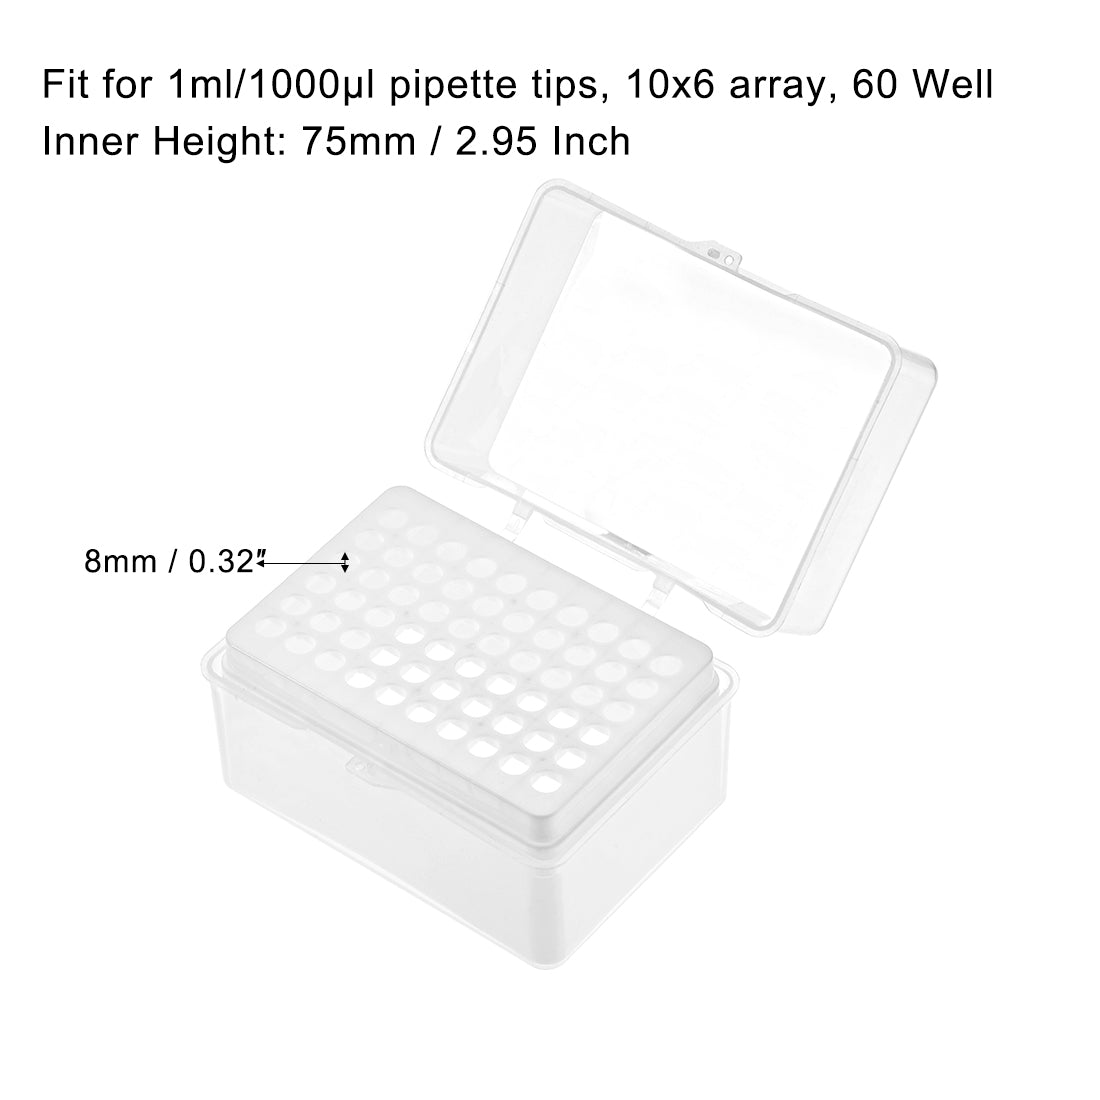 uxcell Uxcell Pipette Tips Box 60-Well Polypropylene Tip Holder Container for 1ml/1000µl Pipettor 8mm Hole Diameter